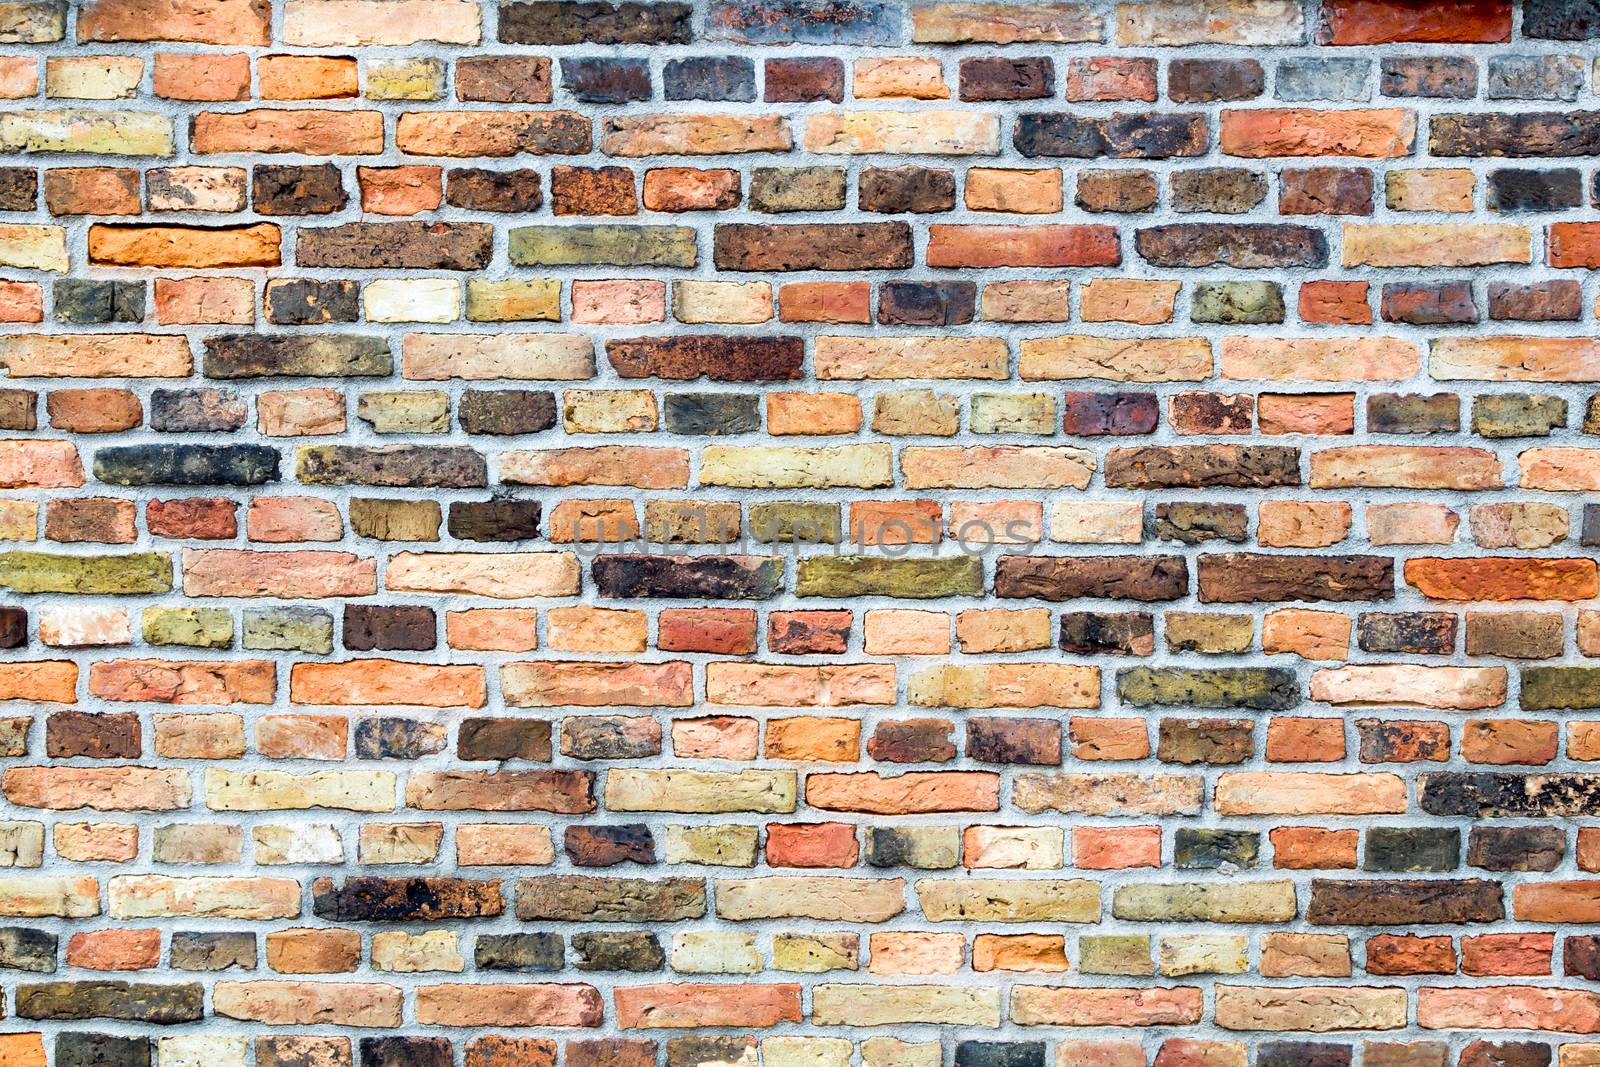 Brick wall of house with various colors